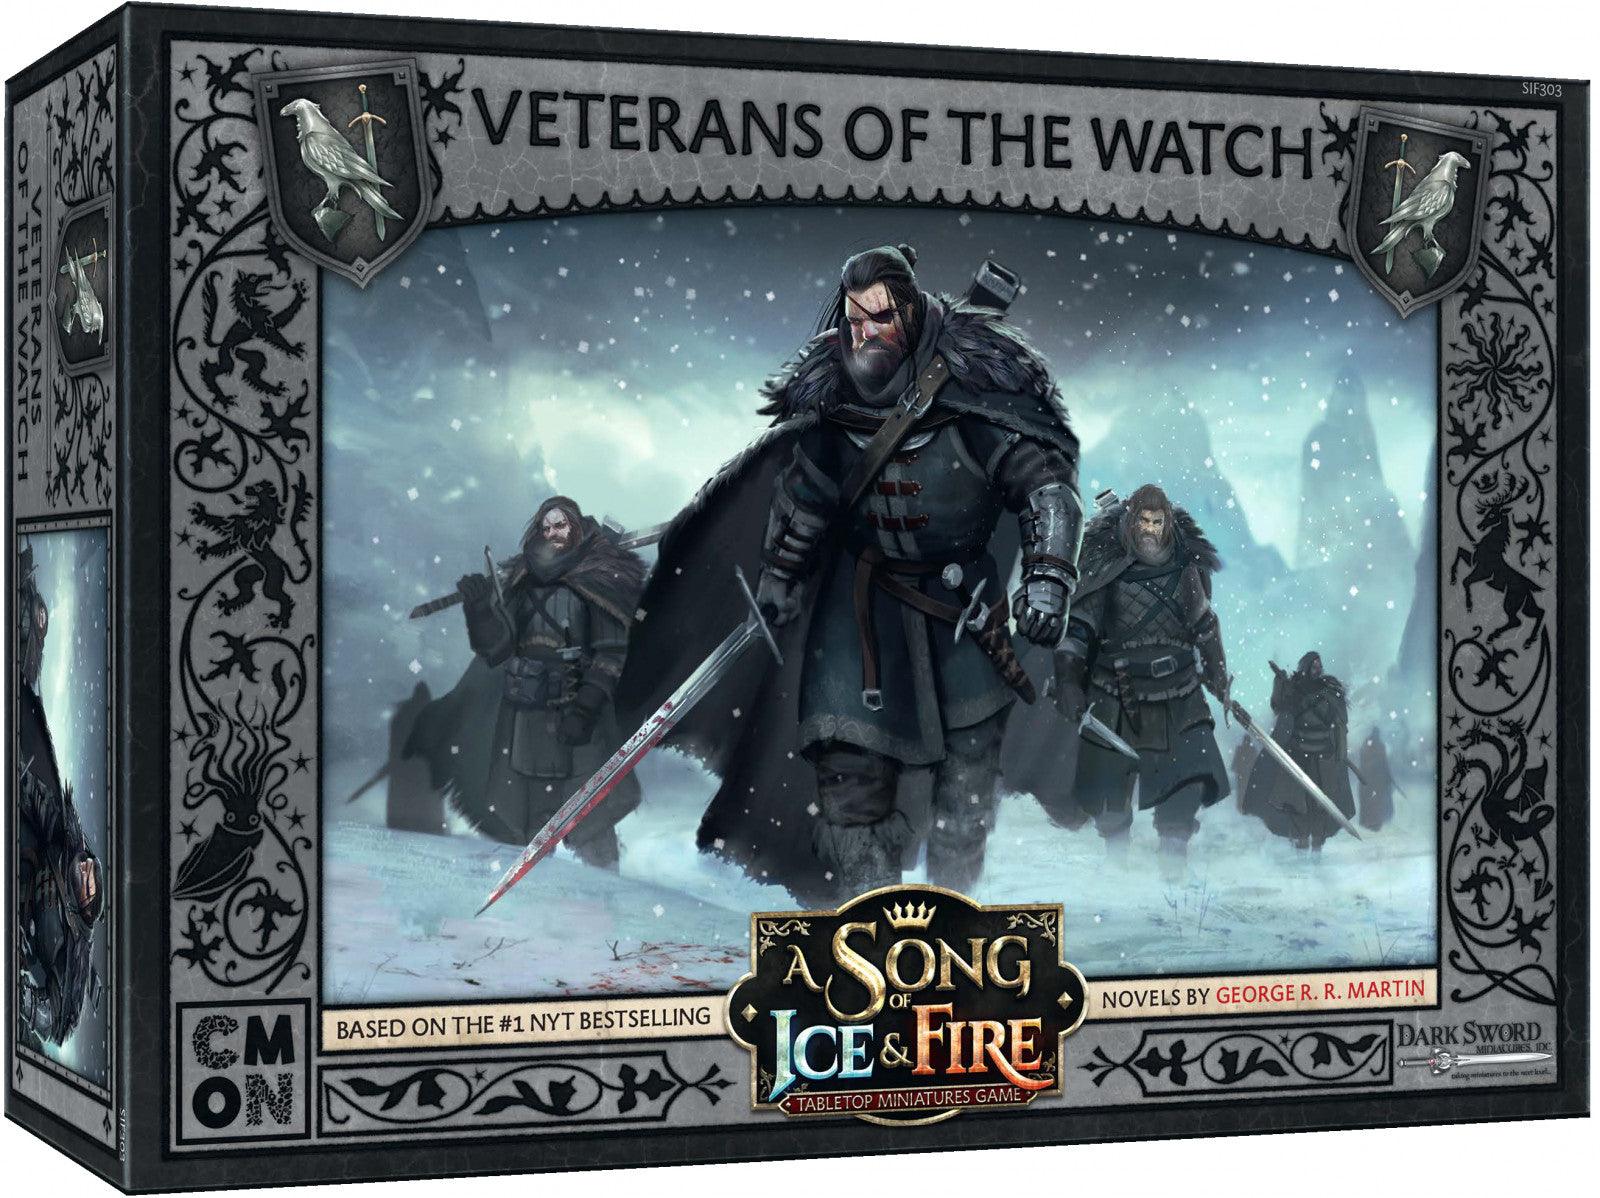 VR-68513 A Song of Ice and Fire TMG - Veterans of the Watch - CMON - Titan Pop Culture